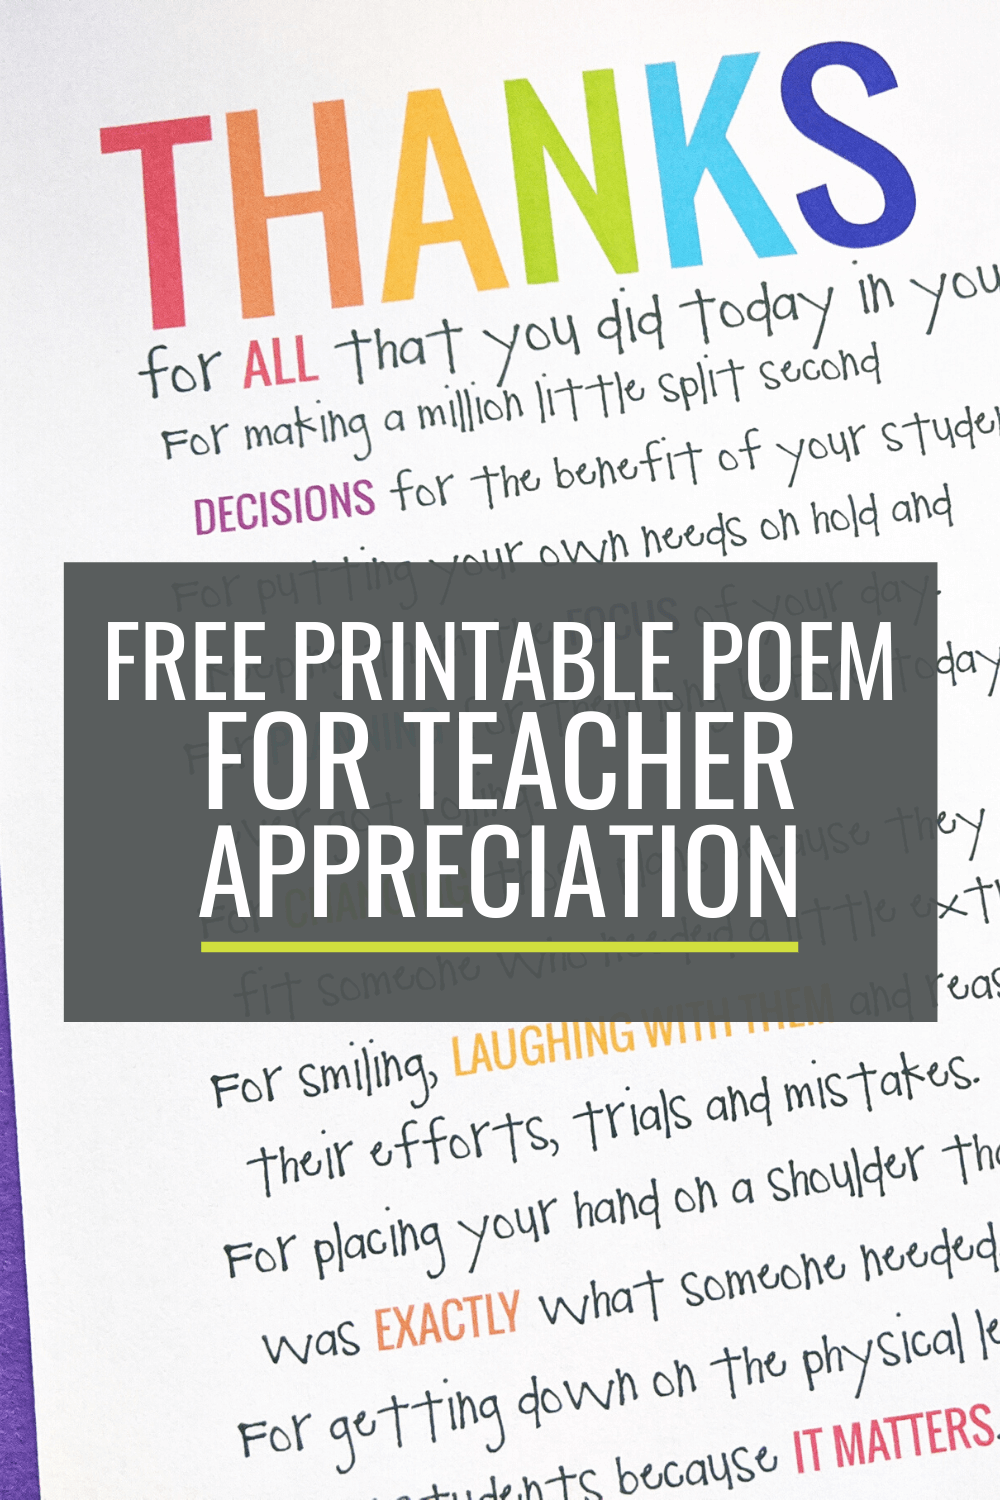 If You Didn\'t Hear This From Anyone Today (Teacher Appreciation Poem)